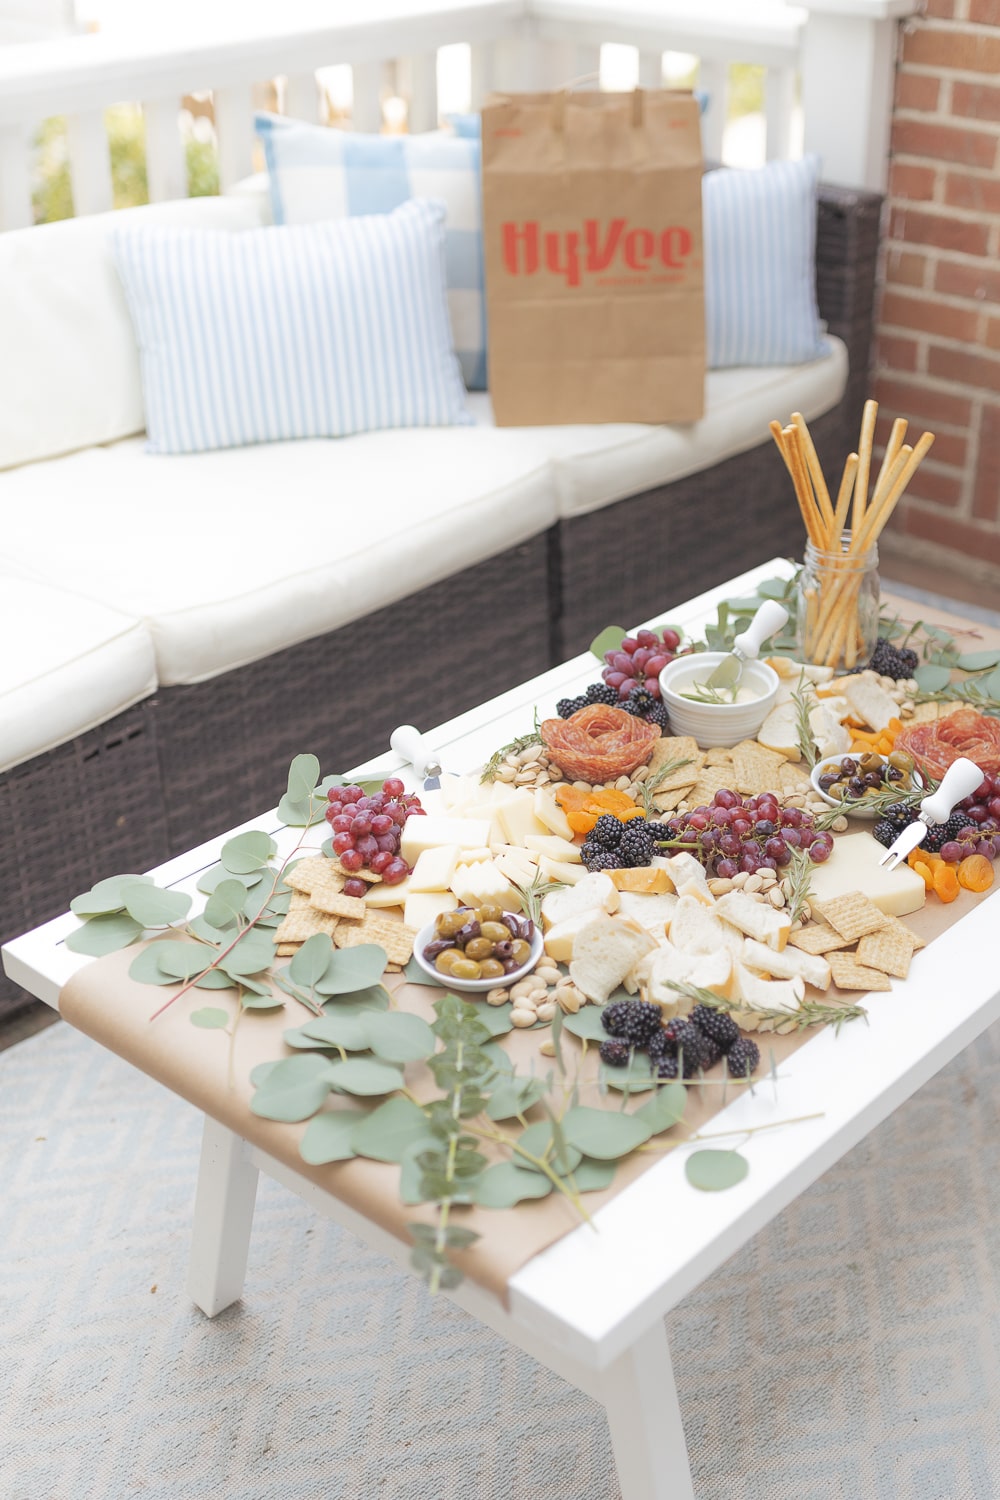 Grazing table food ideas from blogger Stephanie Ziajka on Diary of a Debutante